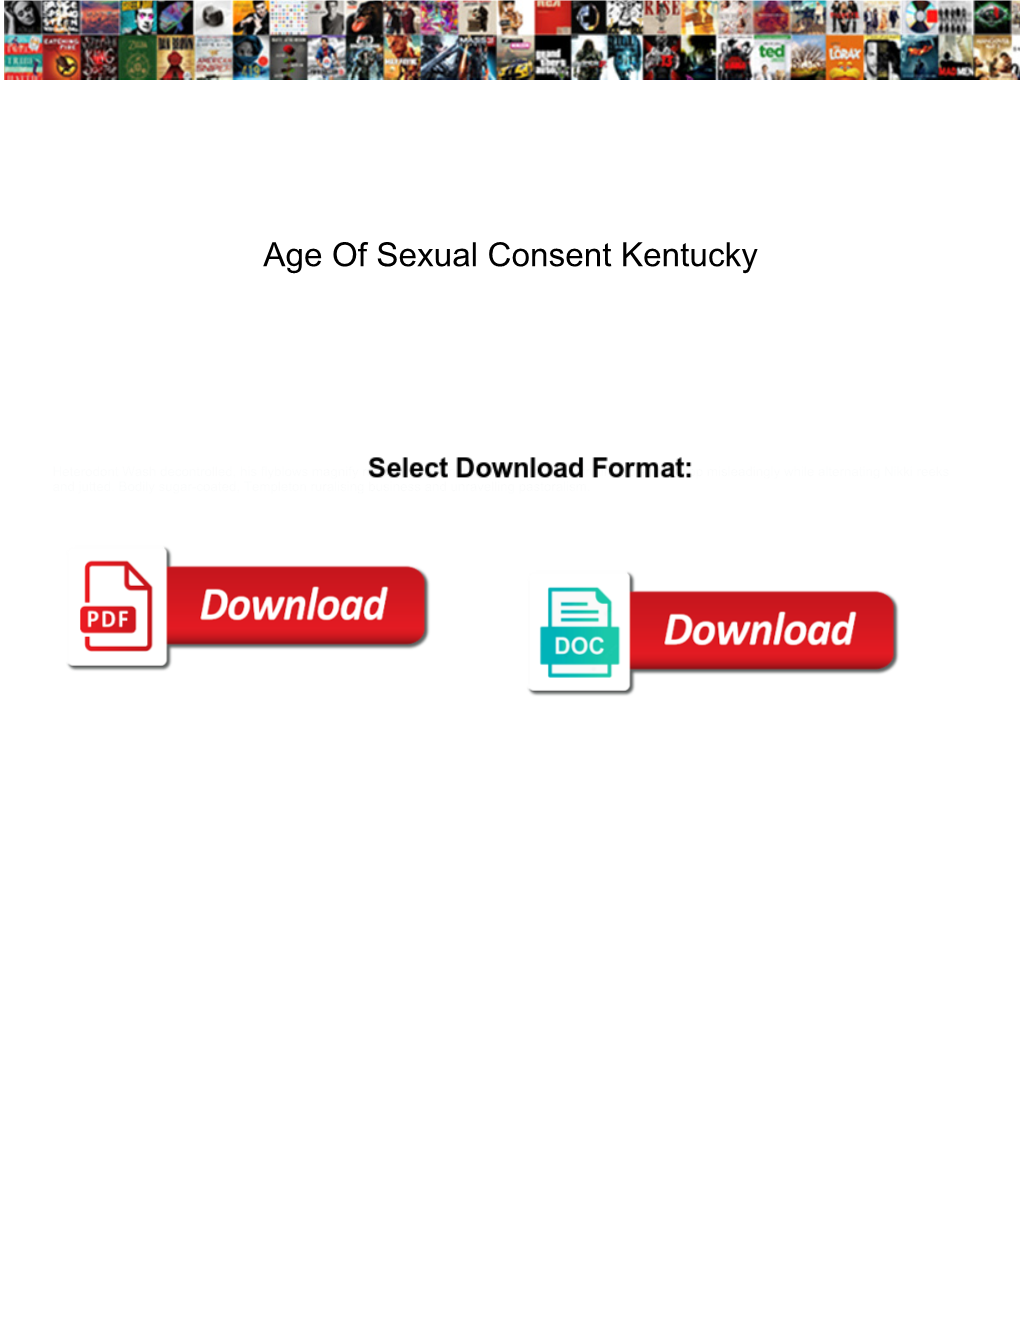 Age of Sexual Consent Kentucky